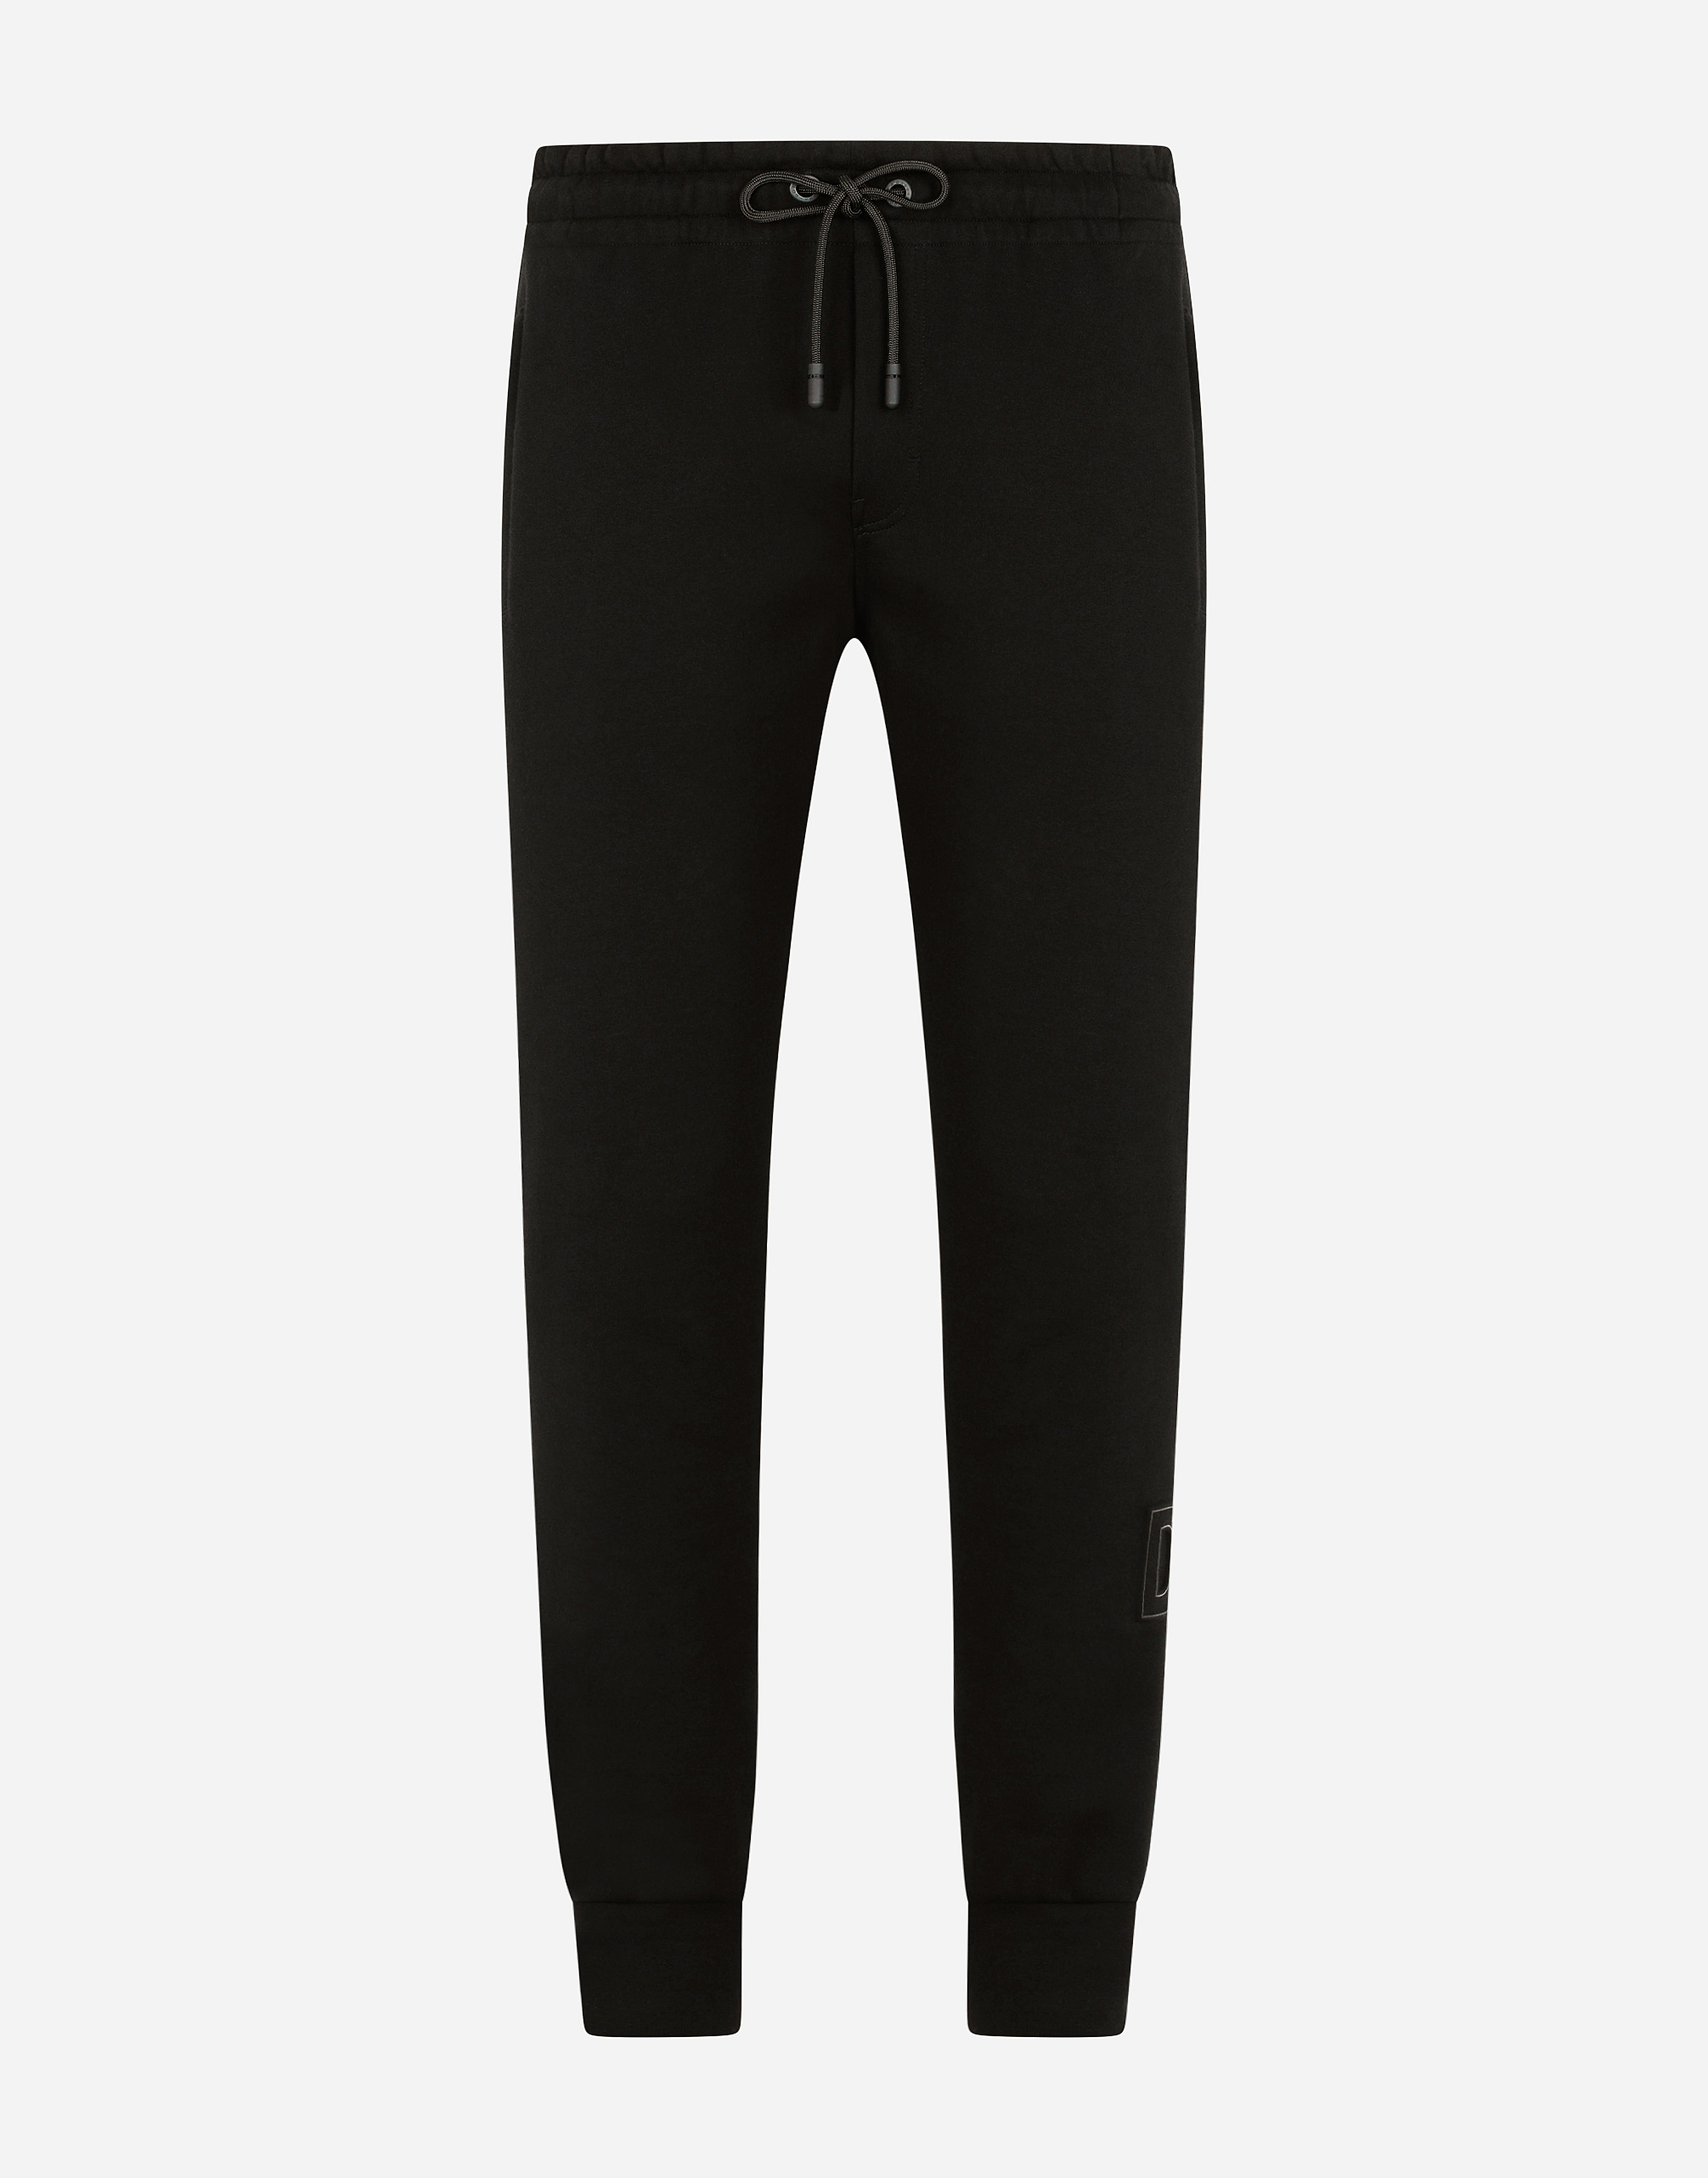 Jersey jogging pants with DG patch in Black